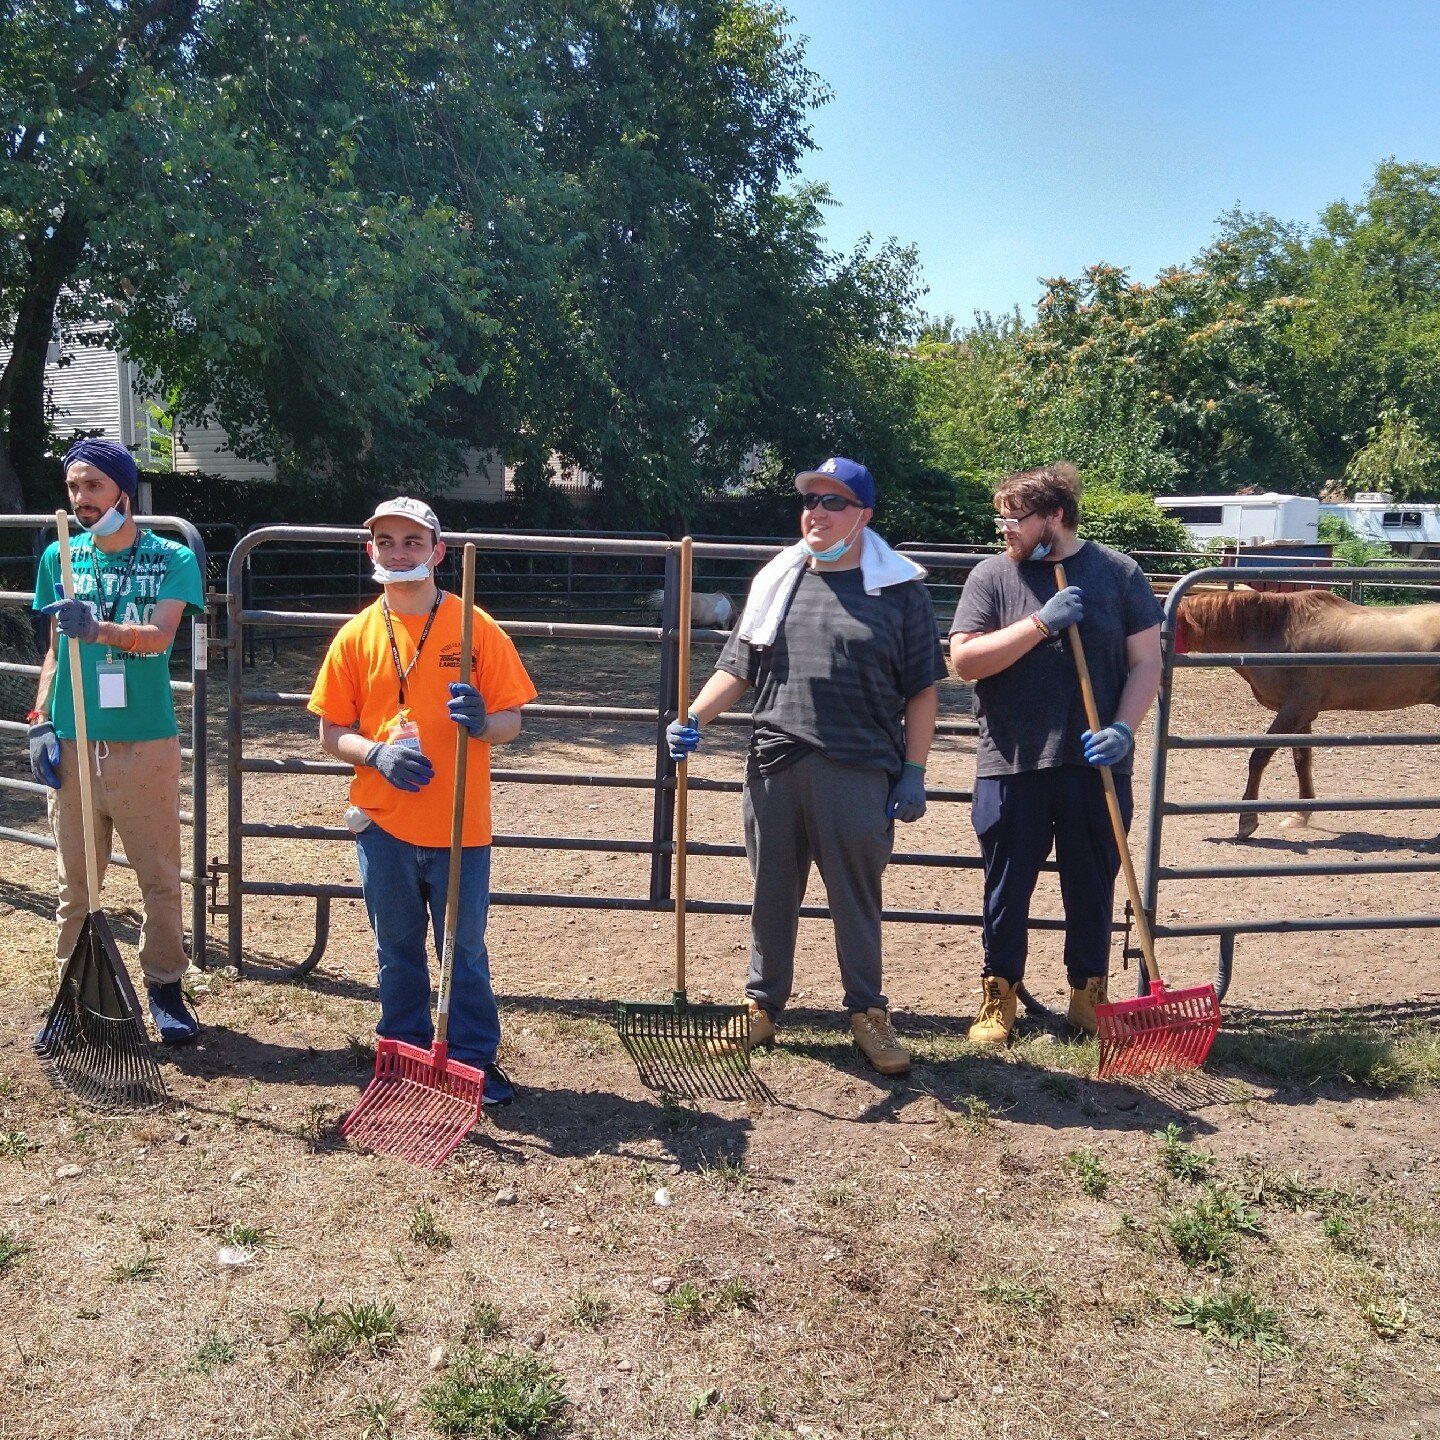 NYFAC (New York Families for Autistic Children) brought several employees for a volunteer day at Sunrise Stables on August 18. They met the horses and helped with barn and yard clean-up. Thank you for your service to @gallopnyc, your efforts are incr